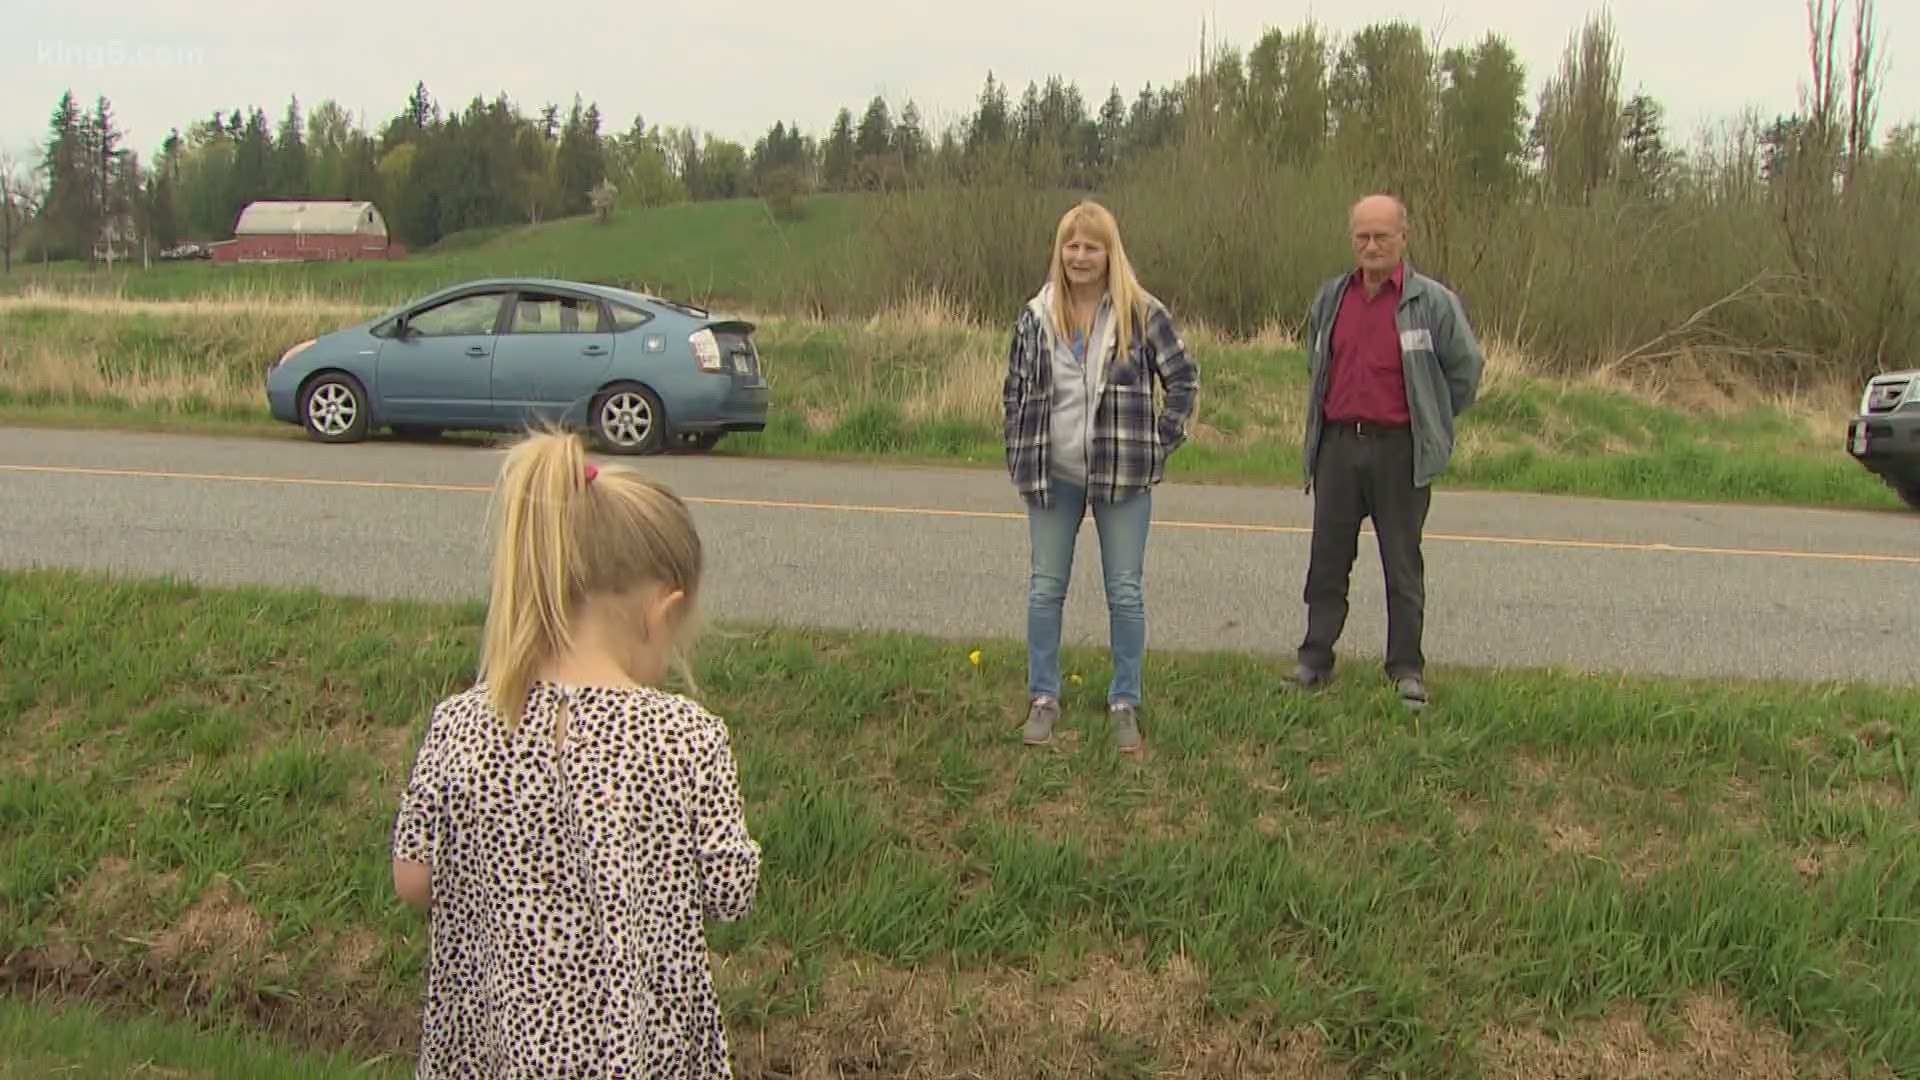 Officials have announced another 30 day closure of the US/Canada border to battle coronavirus, but that's not stopping some families from connecting.